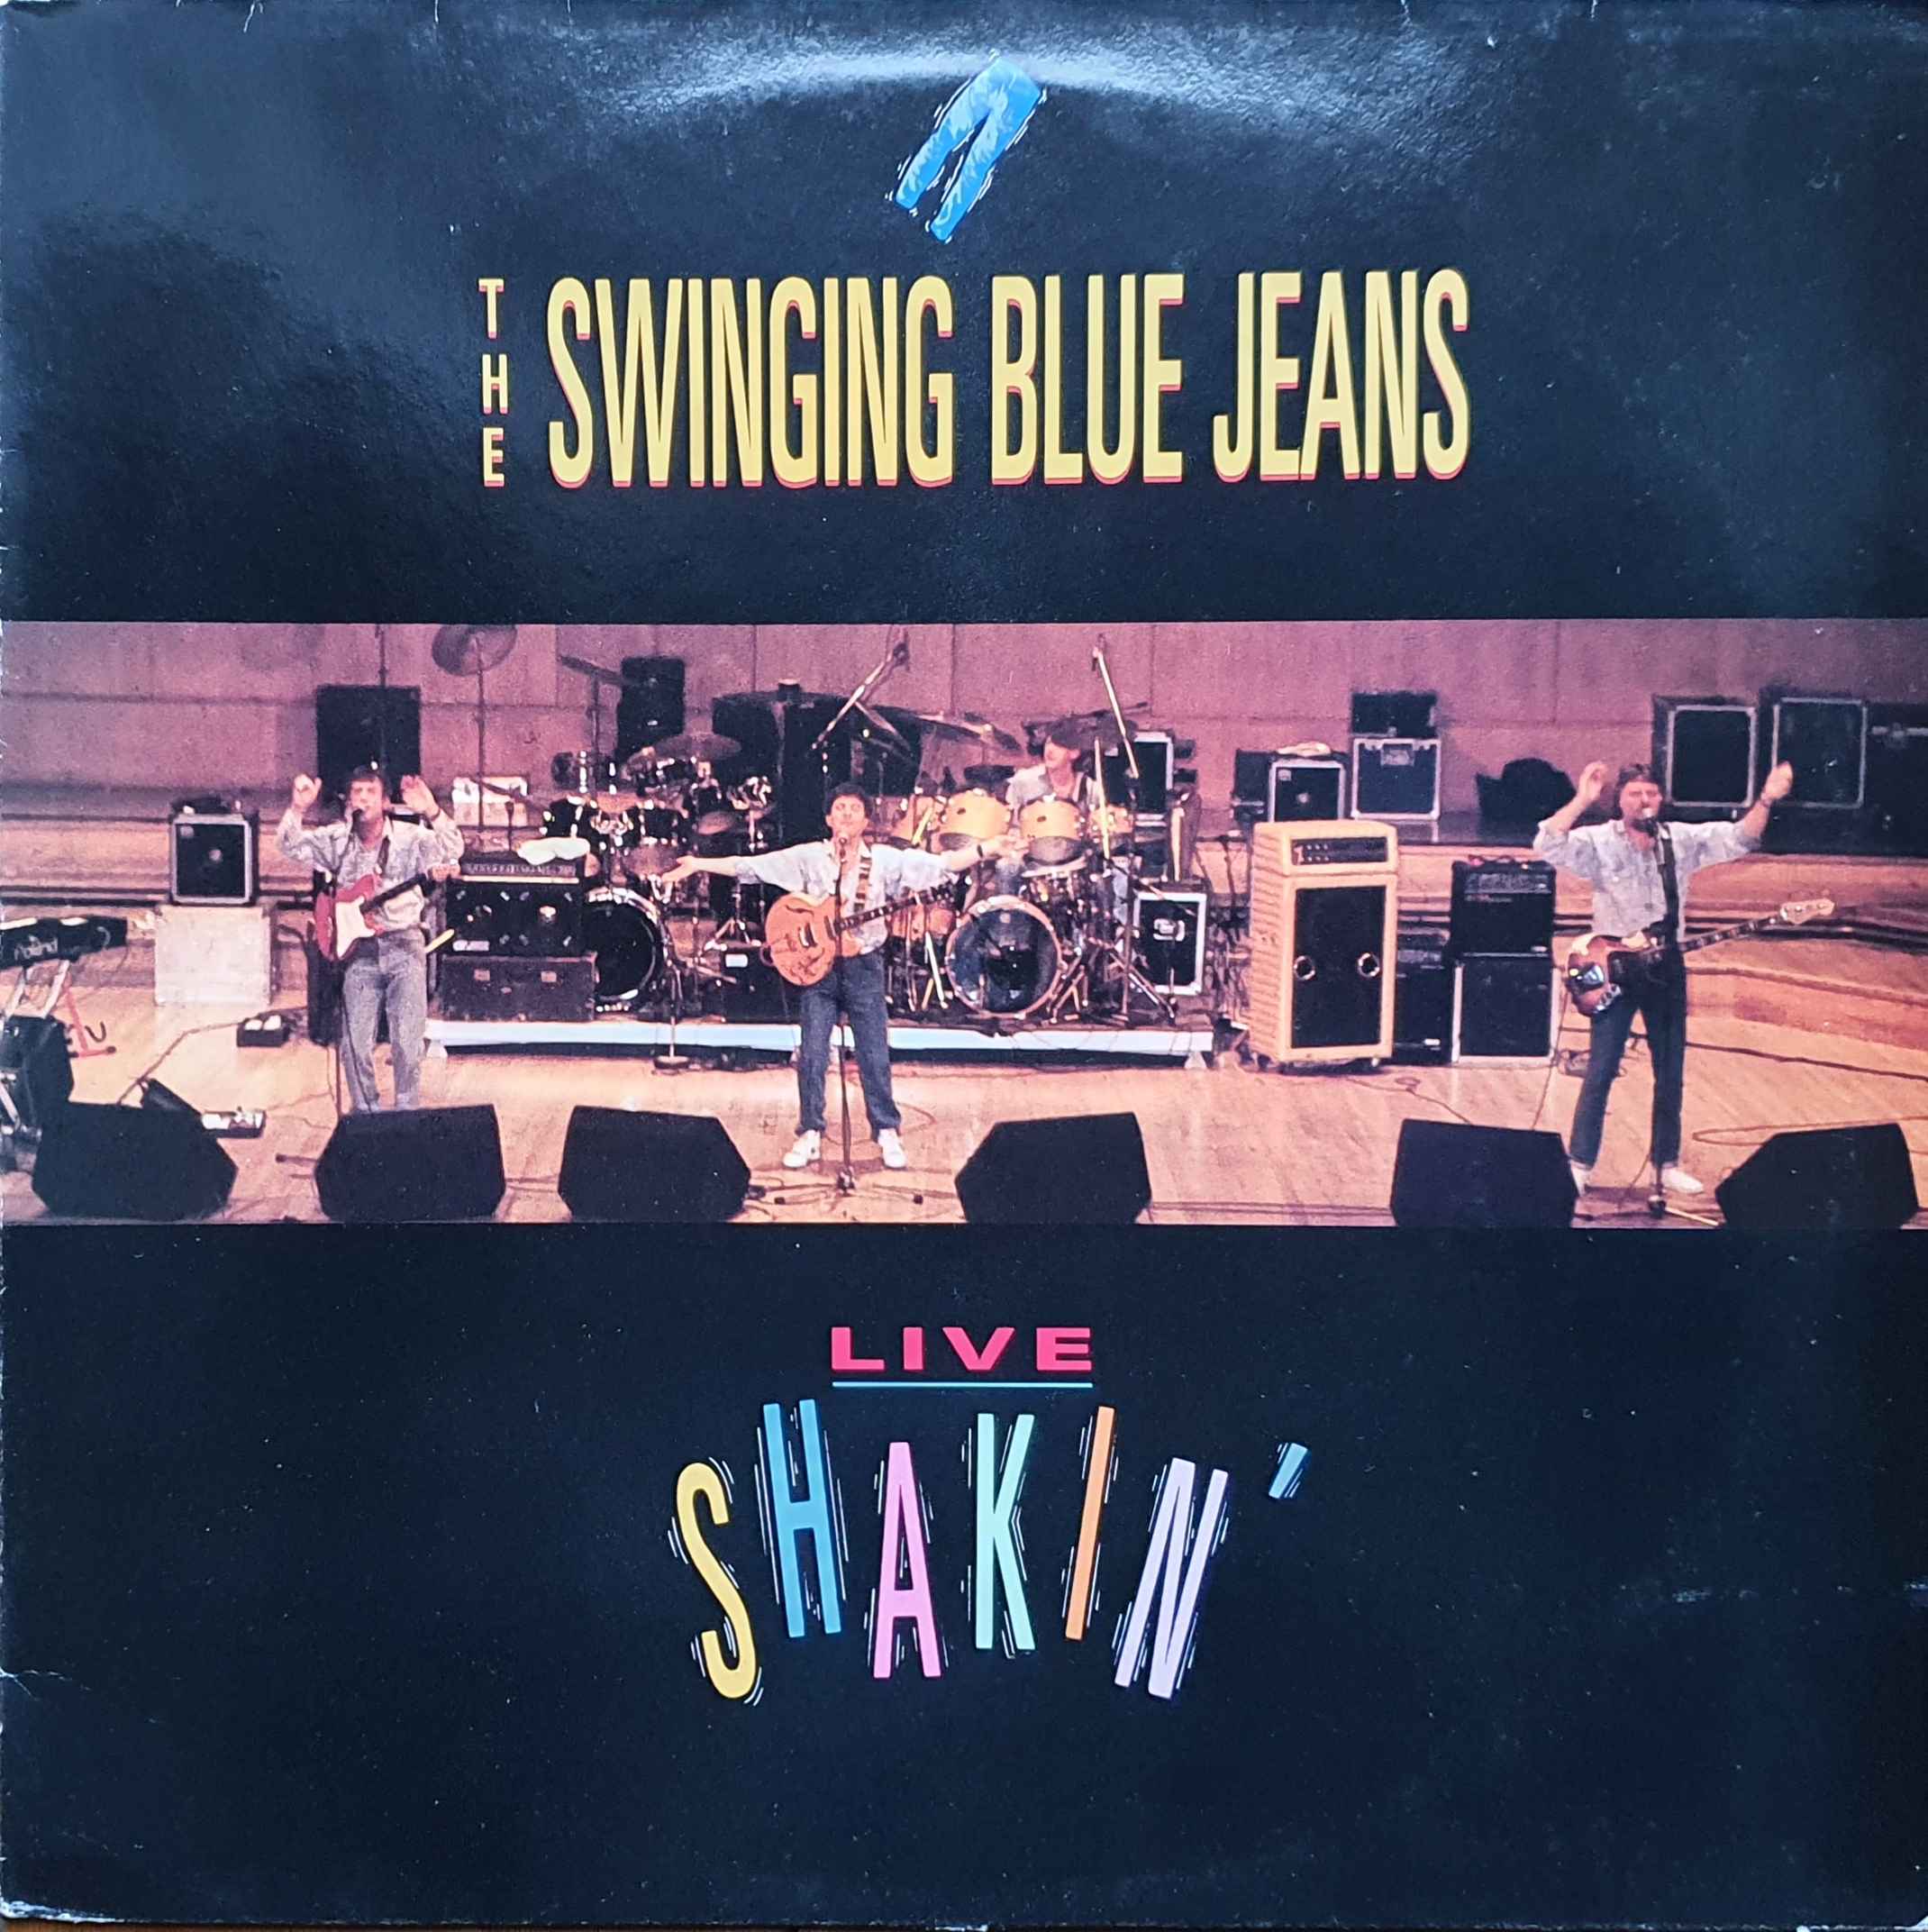 Picture of PRST 502 Live shakin' - Swinging blue jeans by artist Various from the BBC albums - Records and Tapes library